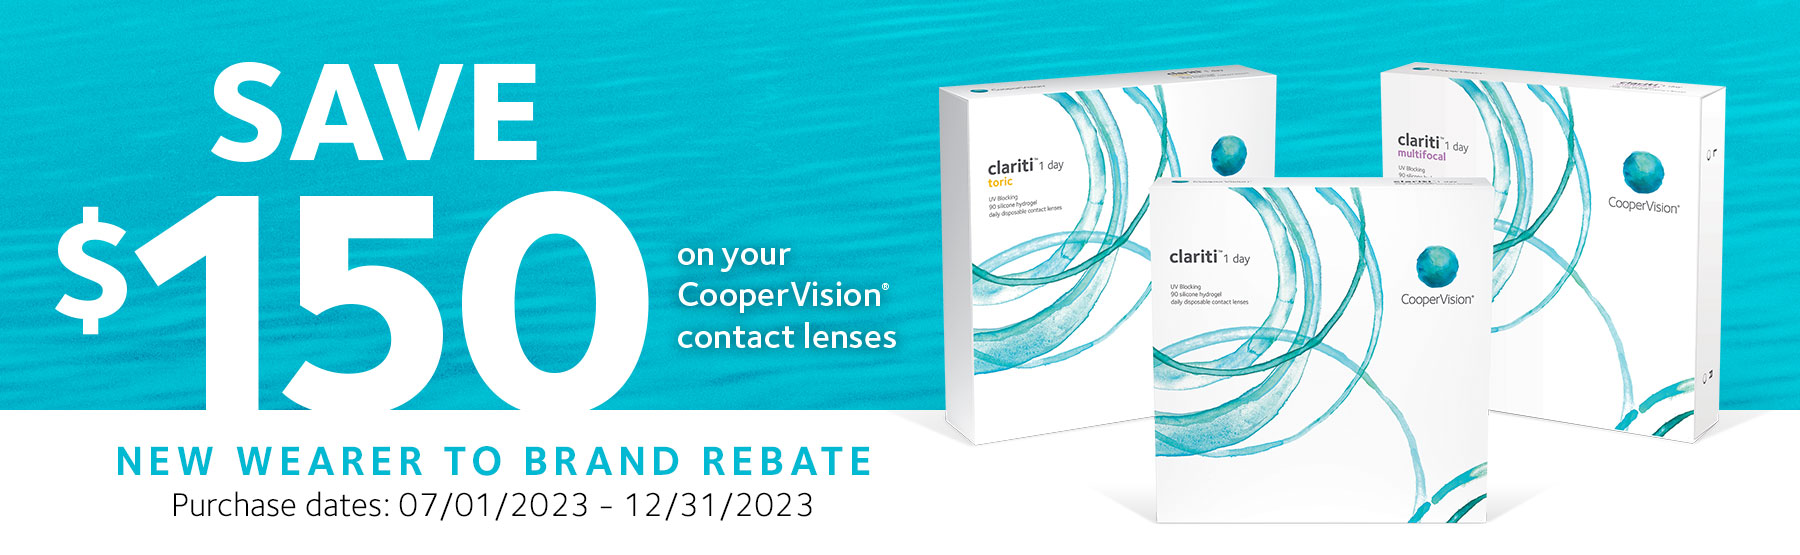 Save $150 on your clariti 1 day contact lenses